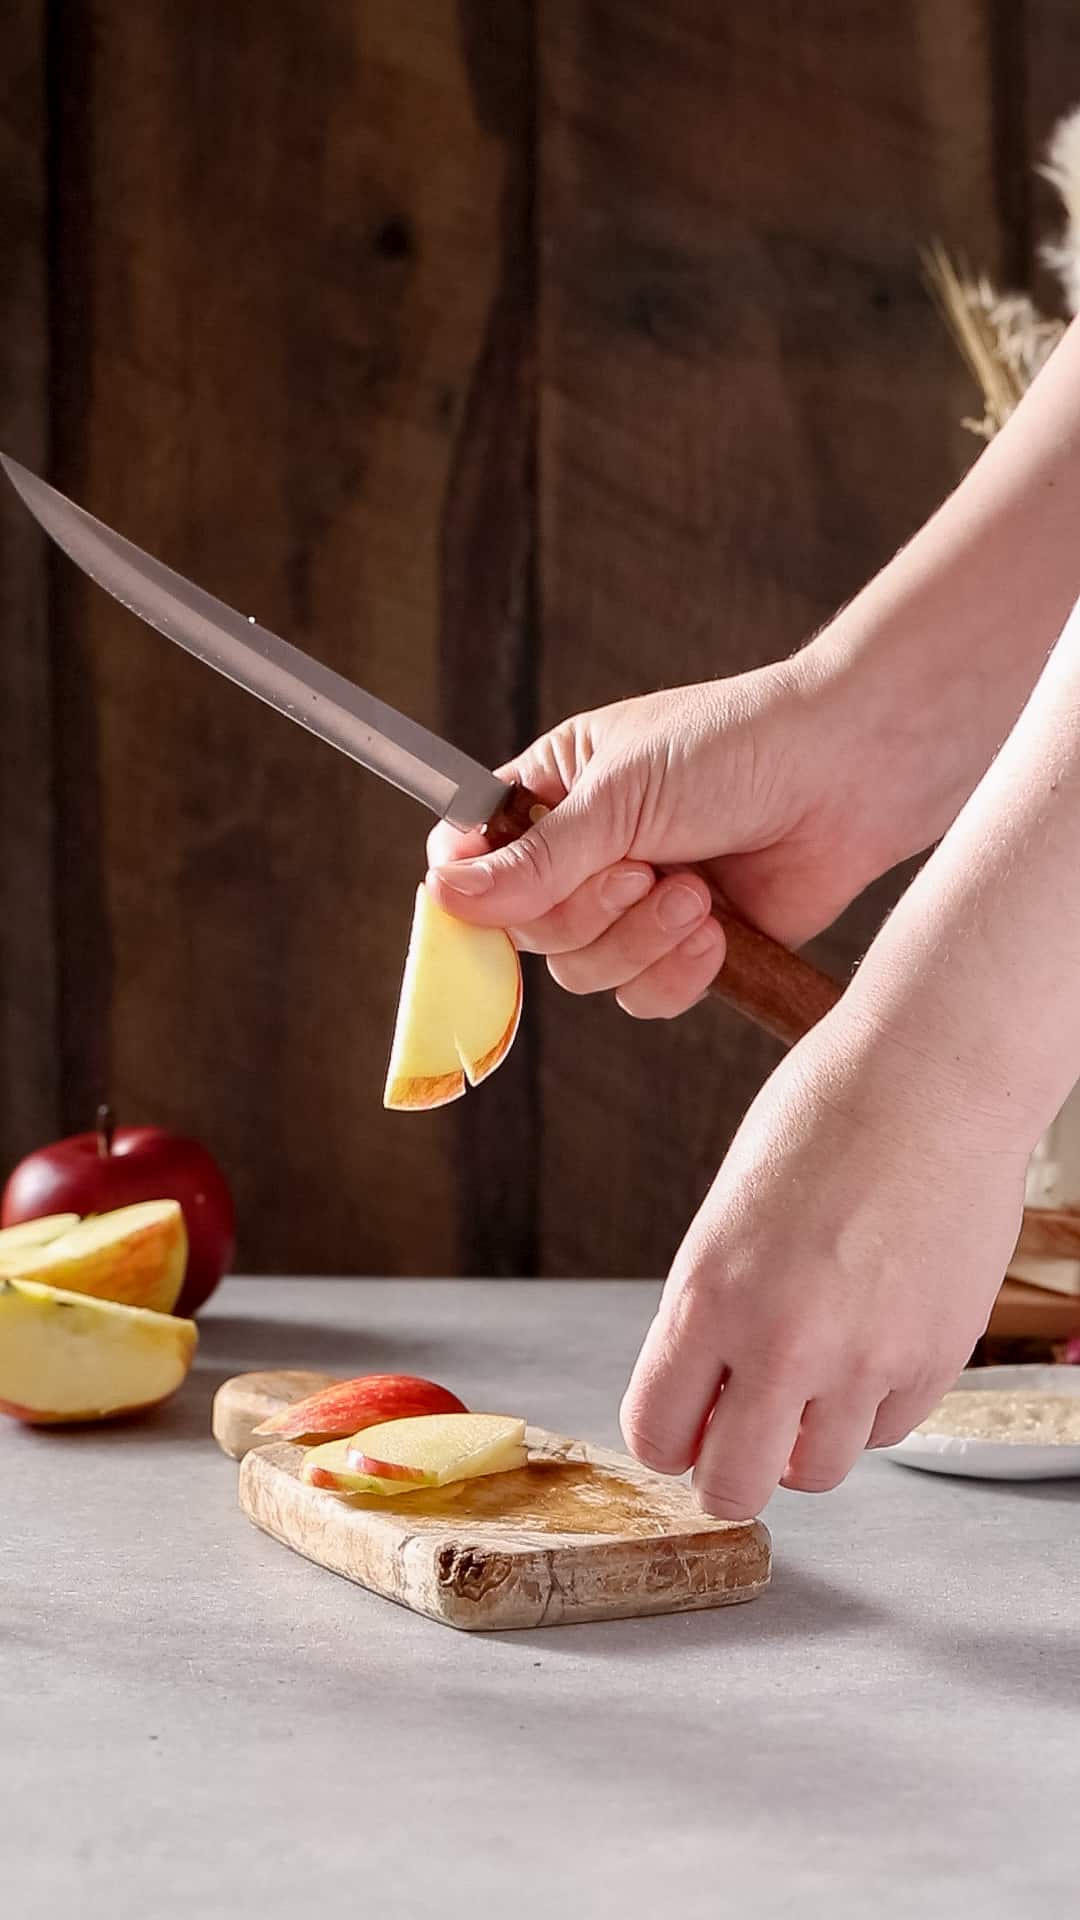 Hand holding up an apple slice that has a notch cut into the side of it. The hand is also holding a wood-handled knife.